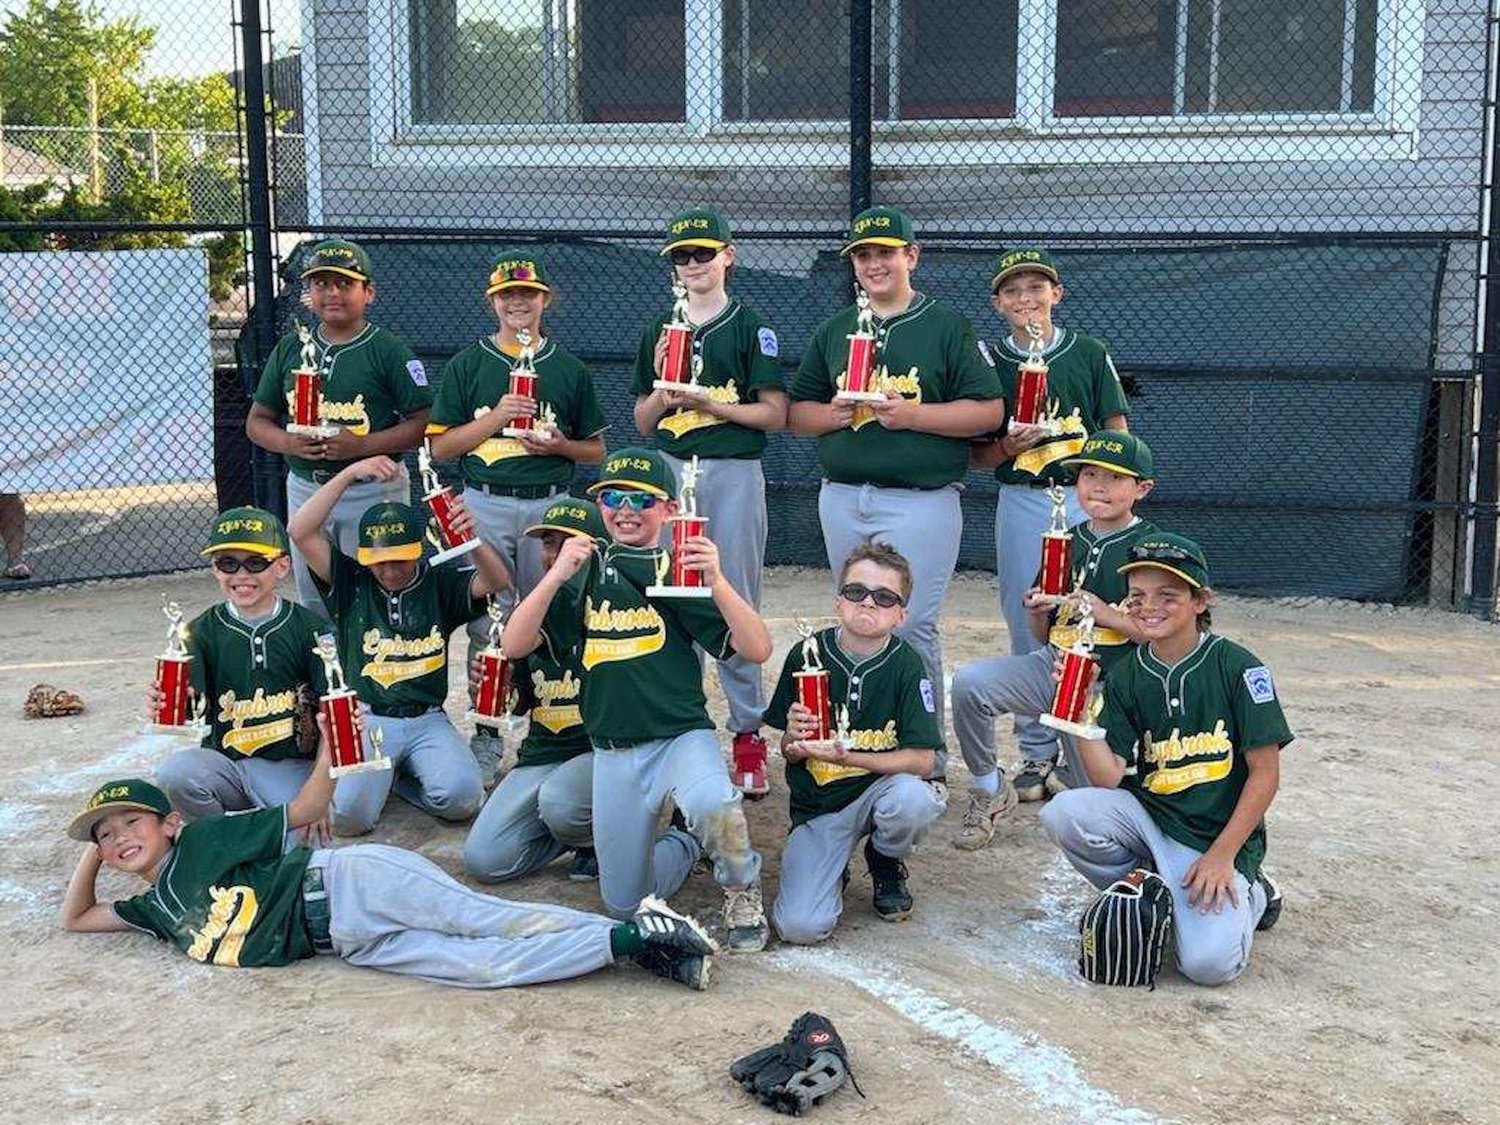 It’s been a few weeks since the Lynbrook/East Rockaway 11u Little League team won their district, but that didn’t stop Lynbrook village officials from honoring their victory late last month.